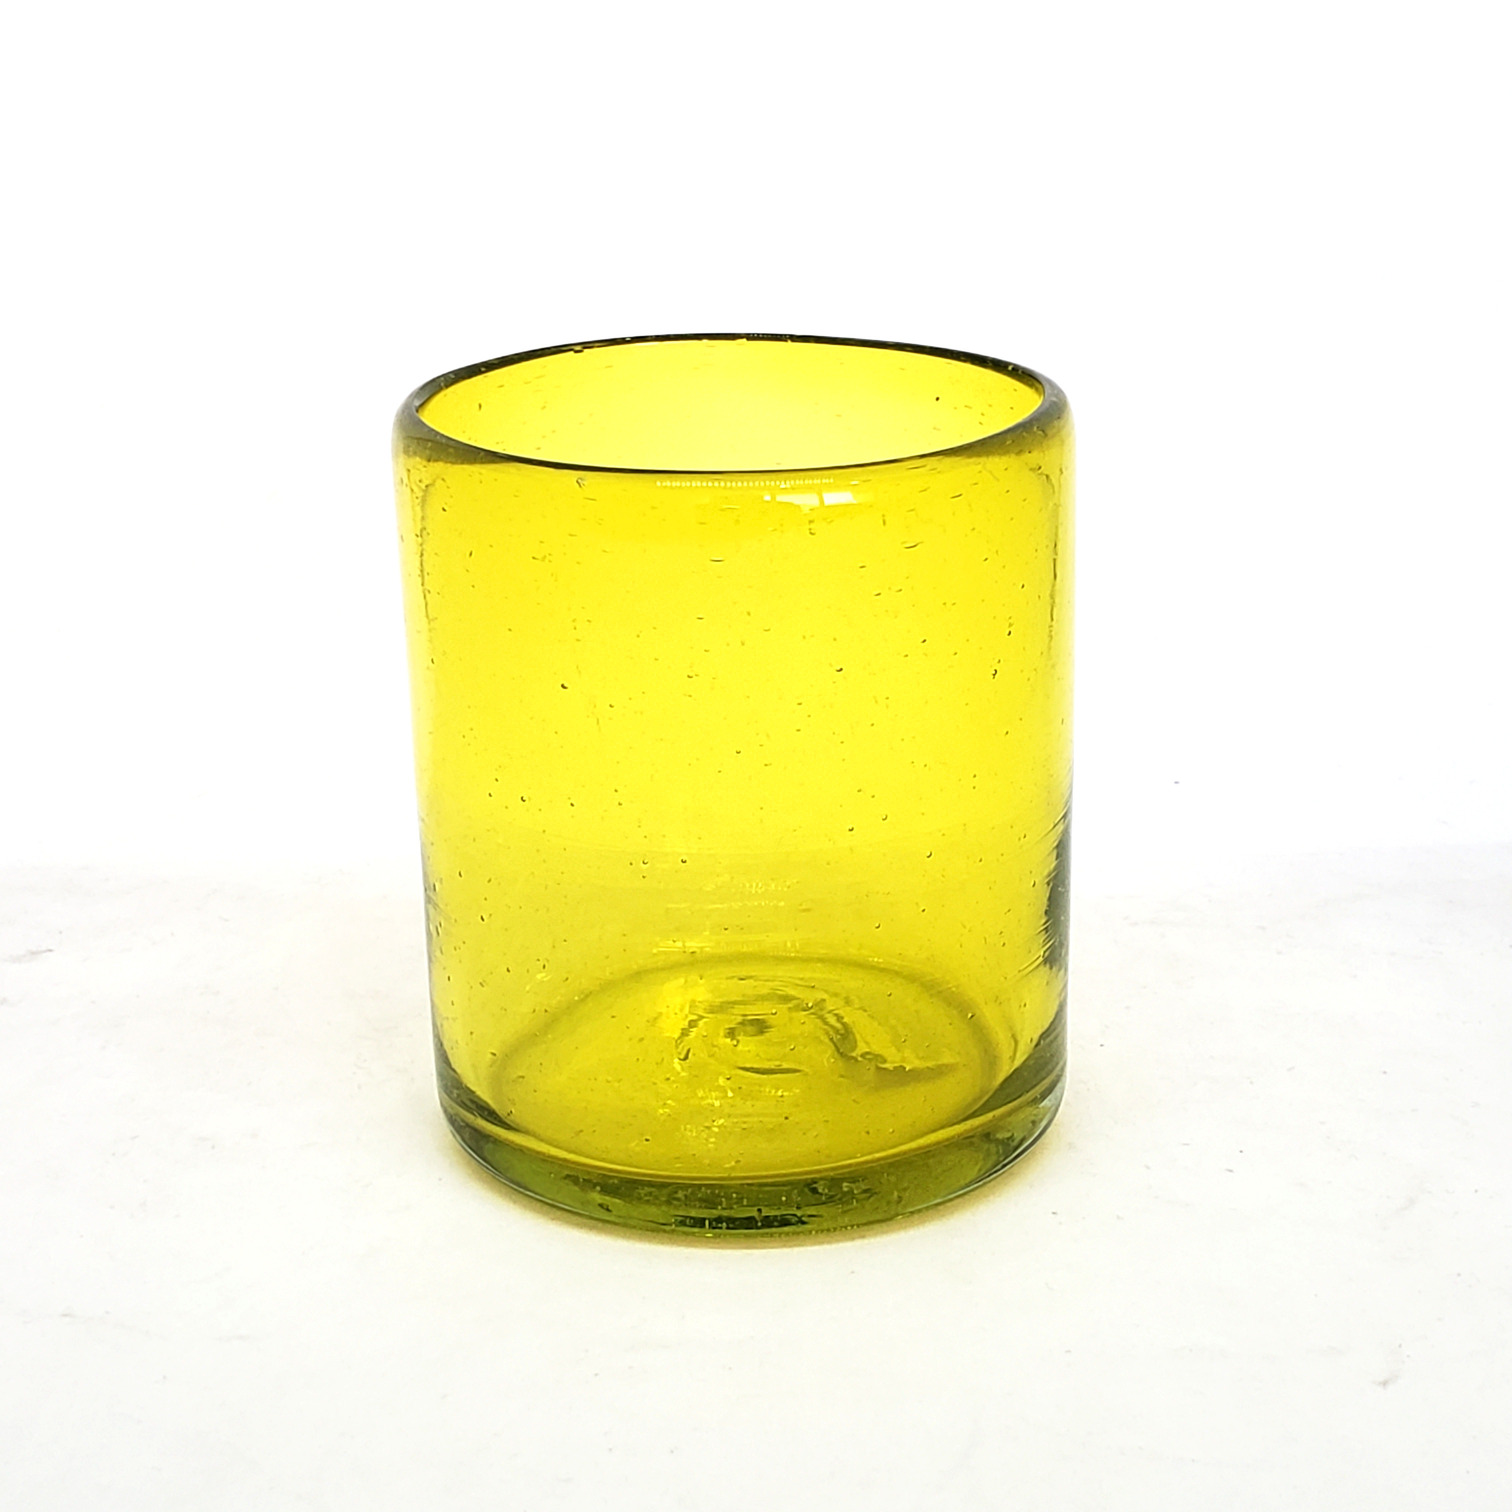 New Items / Solid Yellow 9 oz Short Tumblers (set of 6) / Enhance your favorite drink with these colorful handcrafted glasses.